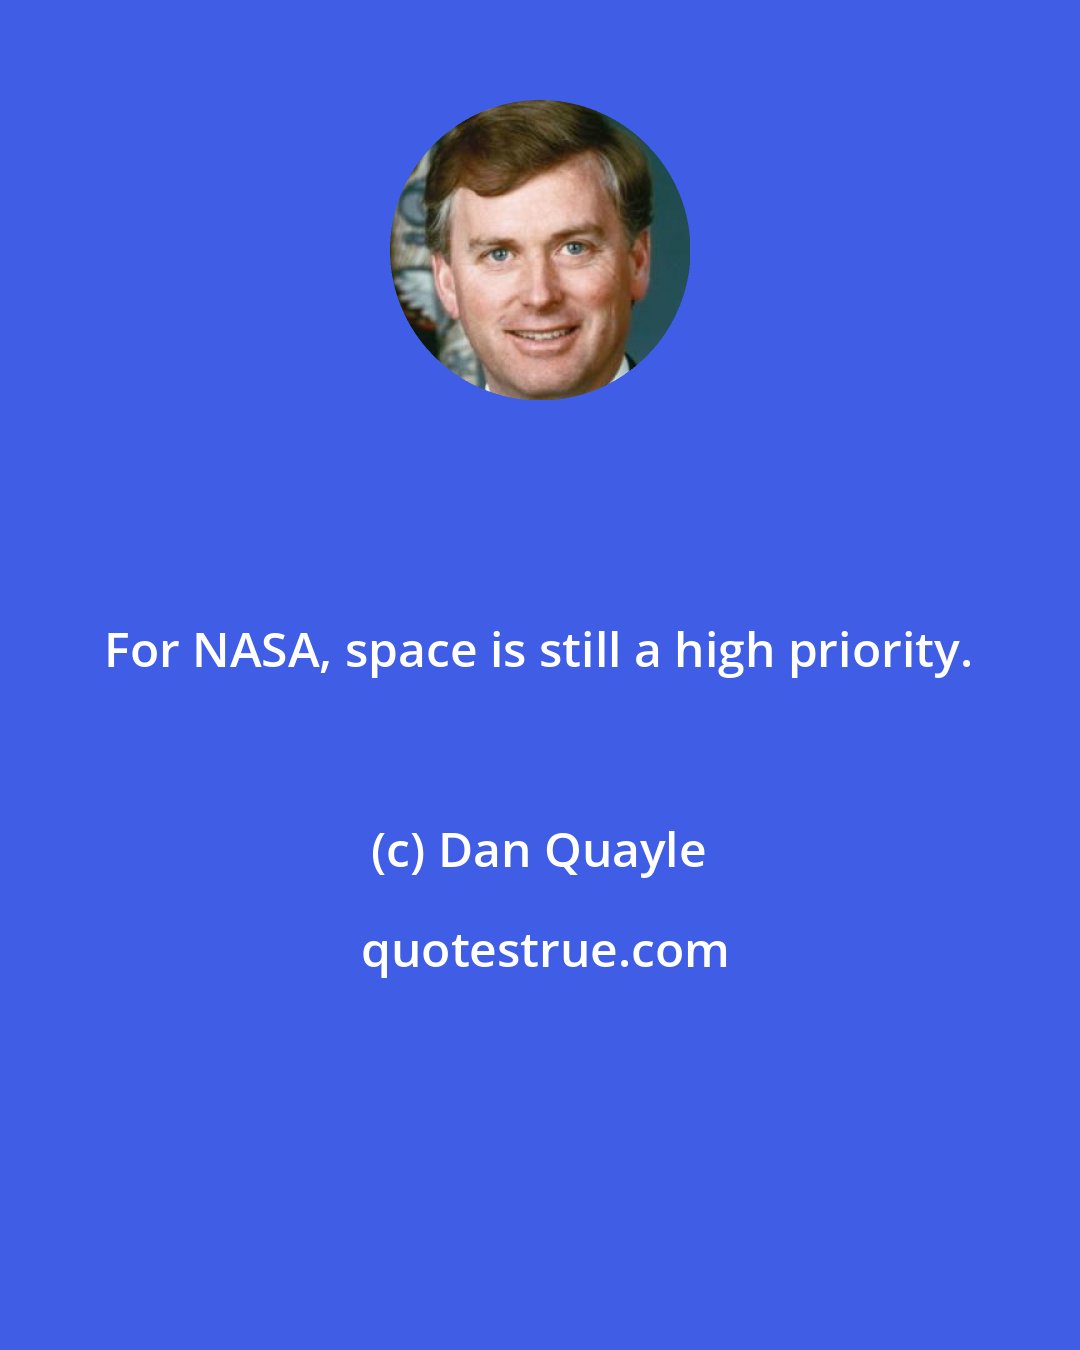 Dan Quayle: For NASA, space is still a high priority.